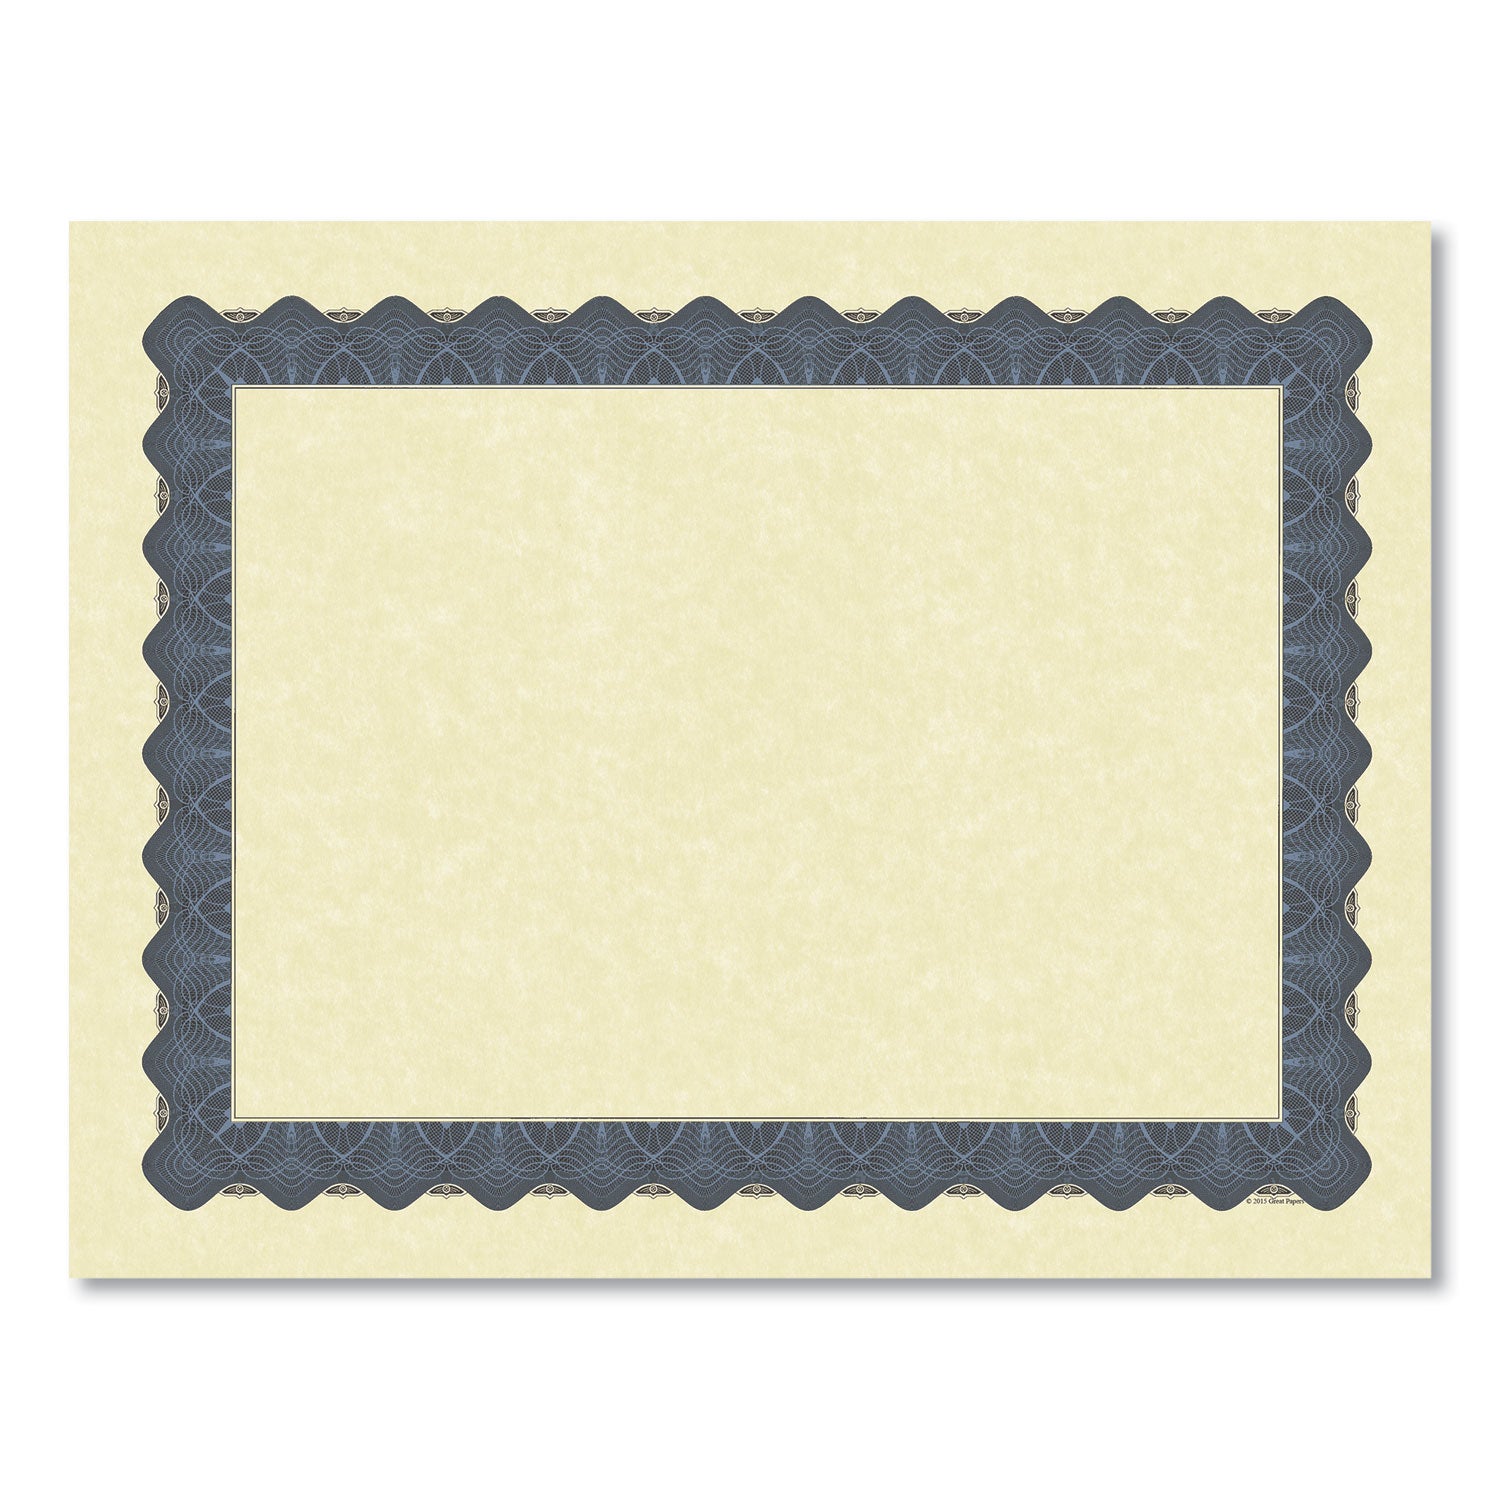 metallic-border-certificates-11-x-85-ivory-blue-with-blue-border-100-pack_grp934400 - 2